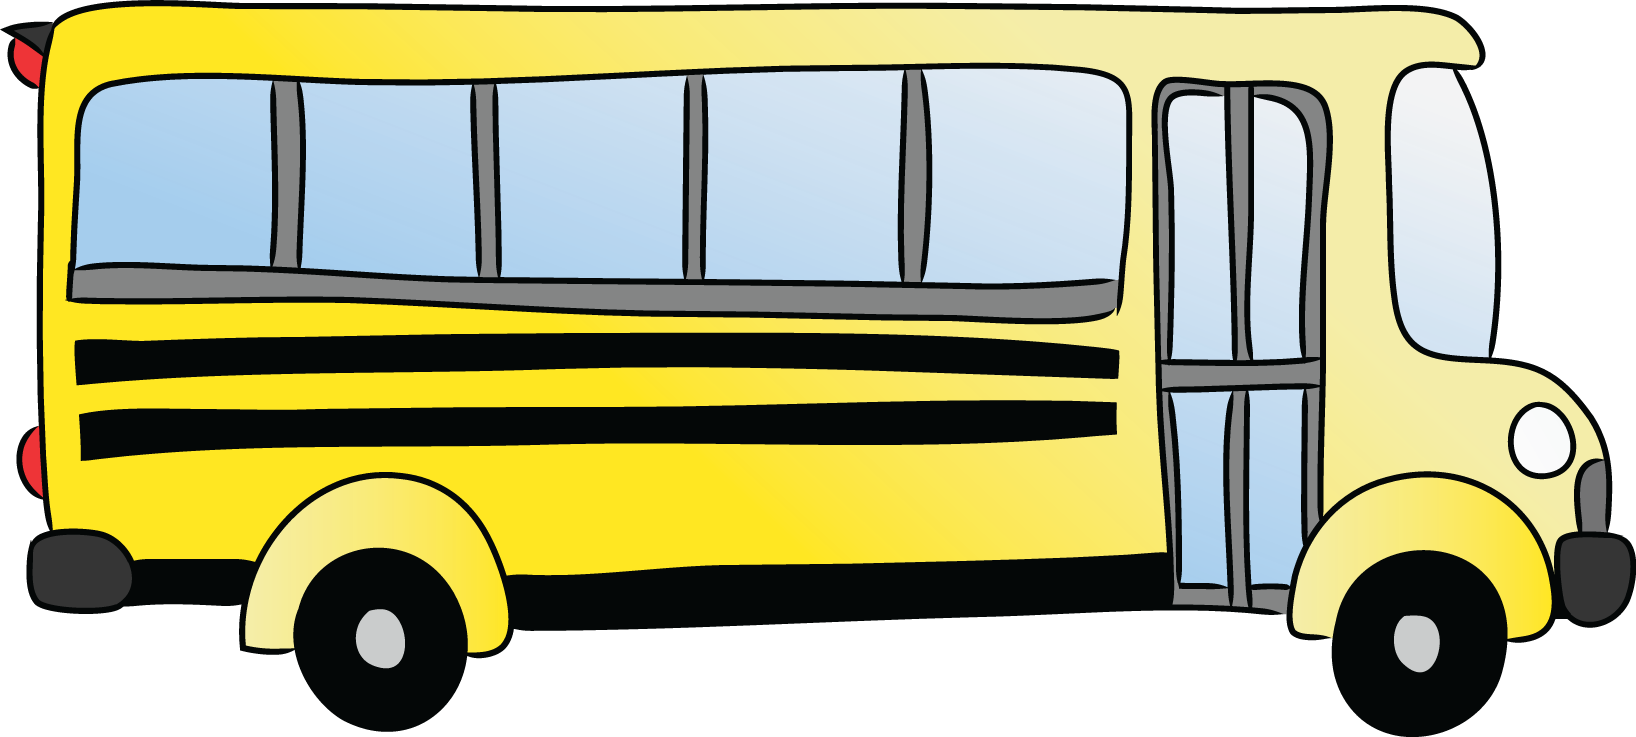 Free Cartoon Picture Of A Bus, Download Free Clip Art, Free